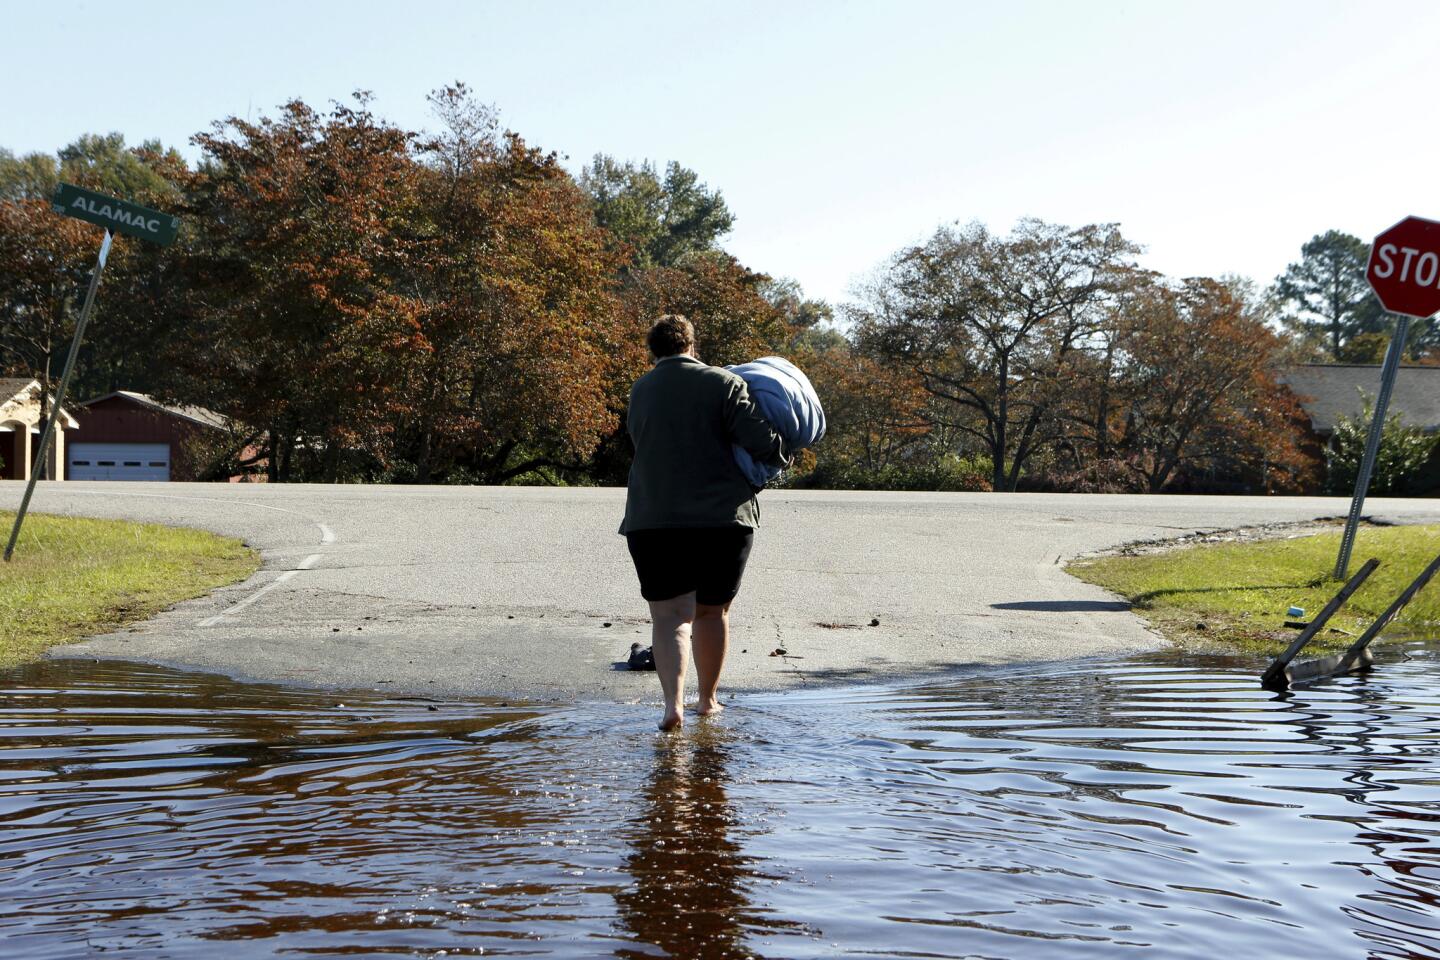 Janet Meier makes her way out of the floodwaters associated with Hurricane Matthew surrounding her home after retrieving a warm blanket and her laptop computer on Oct. 13, 2016 in Lumberton, N.C.